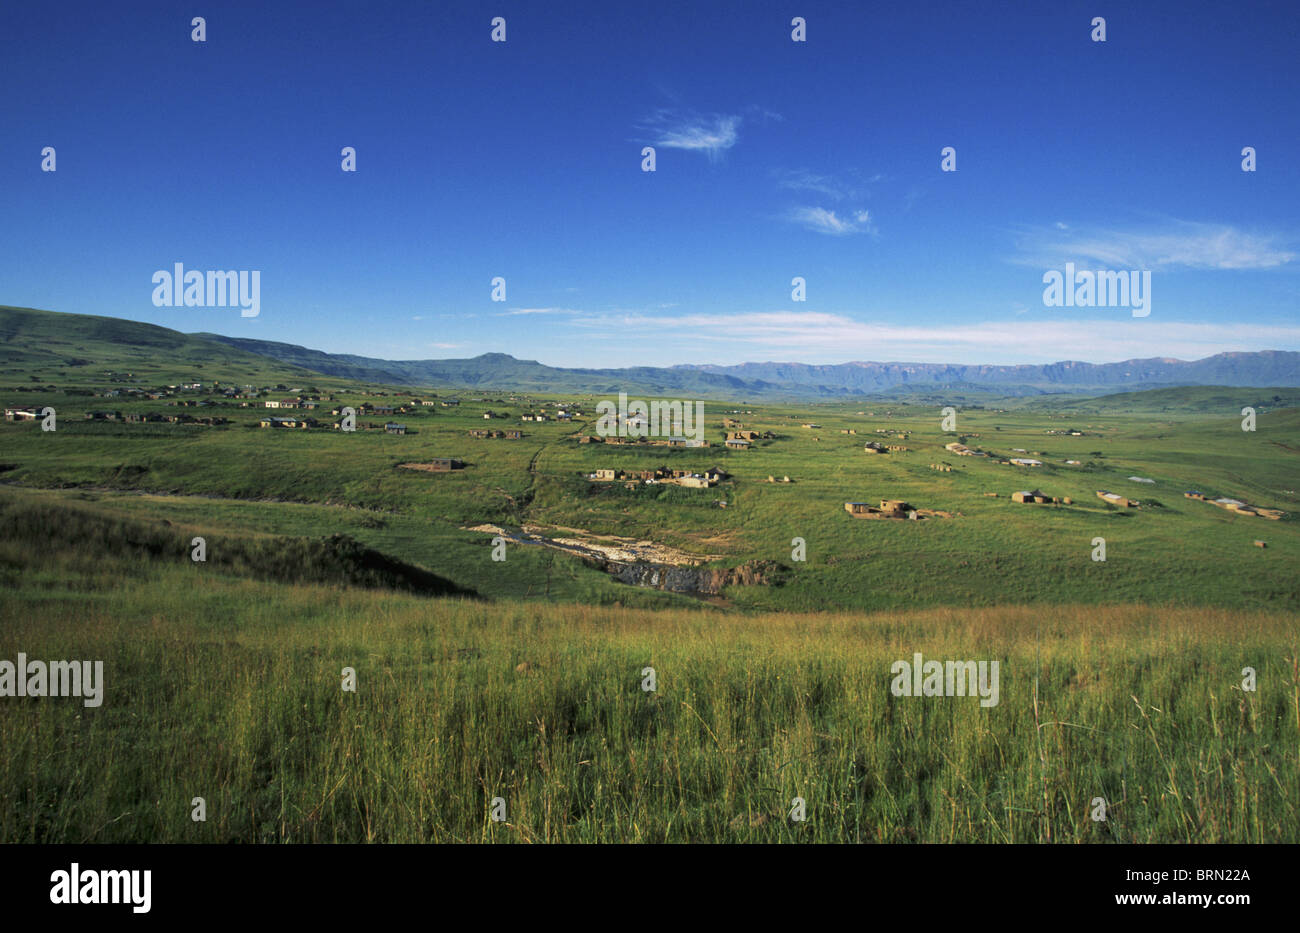 The rural lands and scattered rural Zulu dwellings in the escarpment area of the Drakensberg near Injasuti Stock Photo